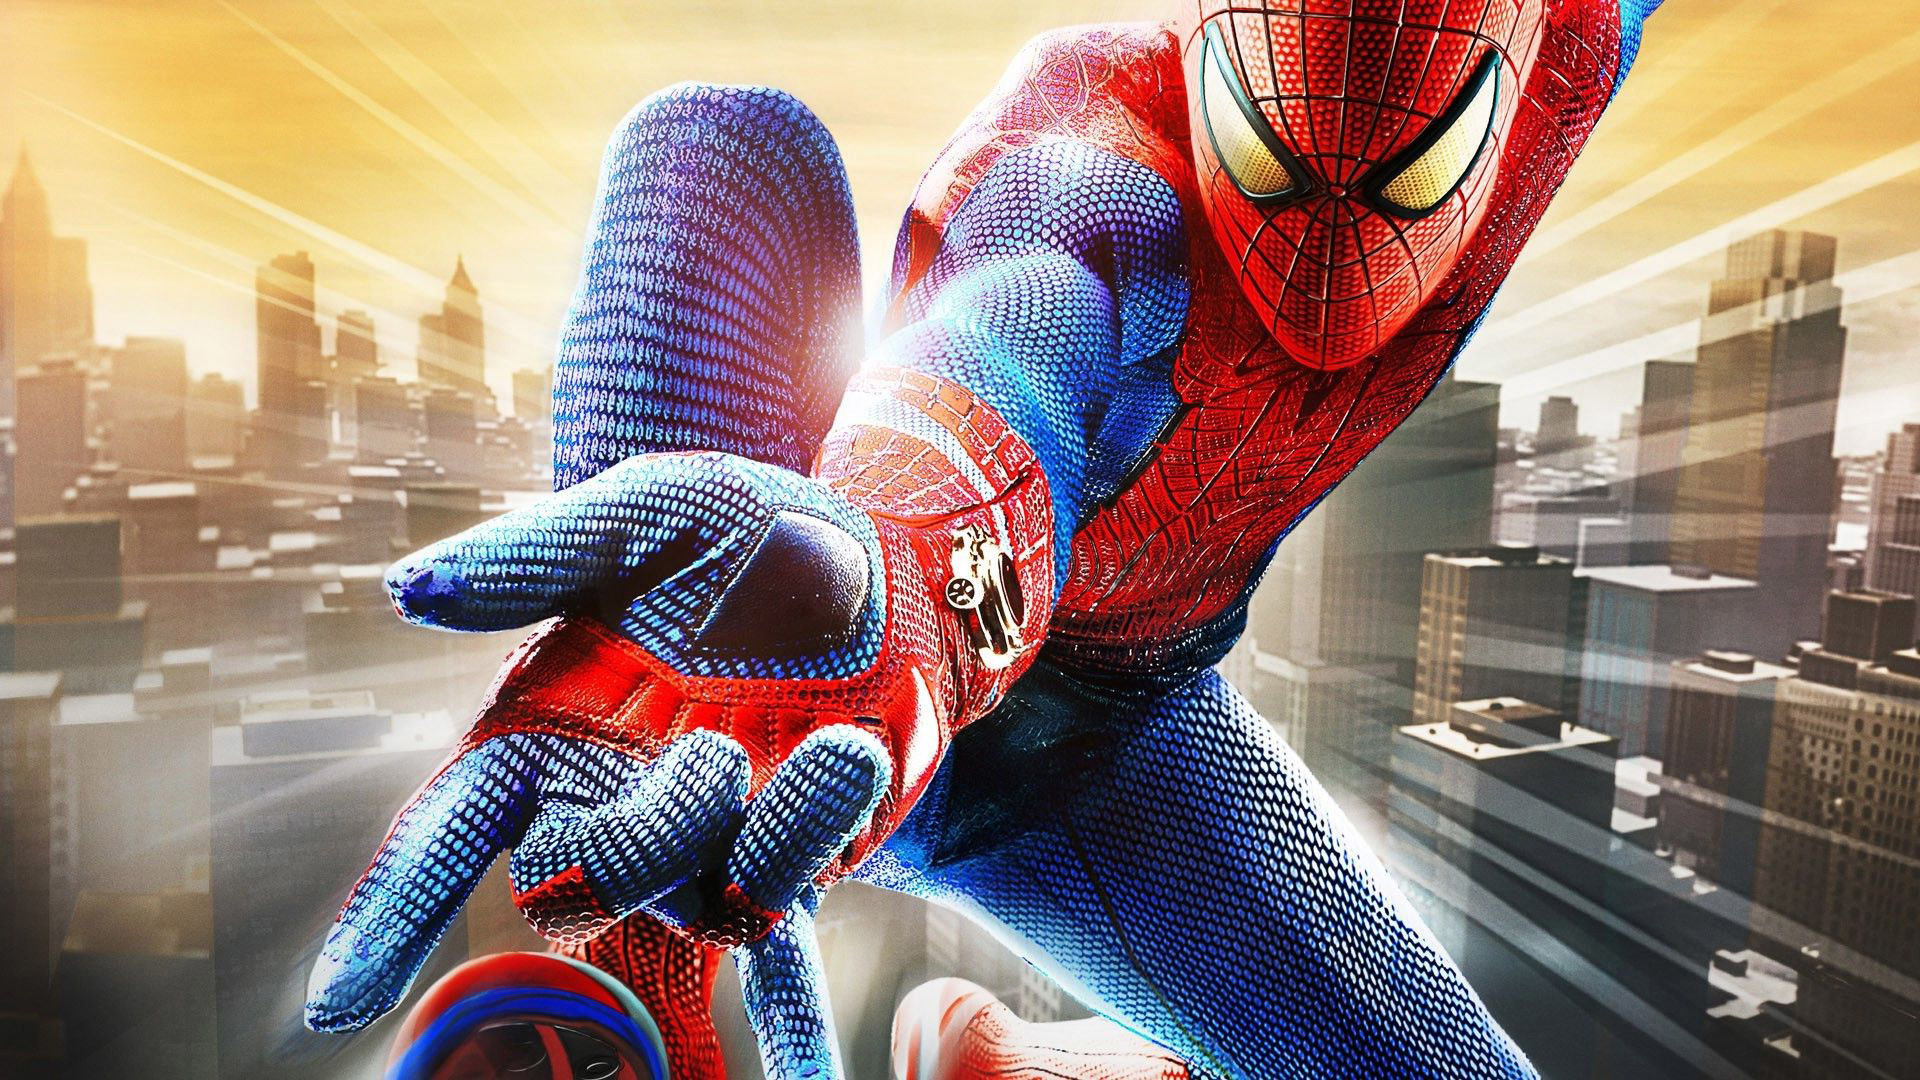 The Amazing Spider-Man: Lizard Rampage Pack